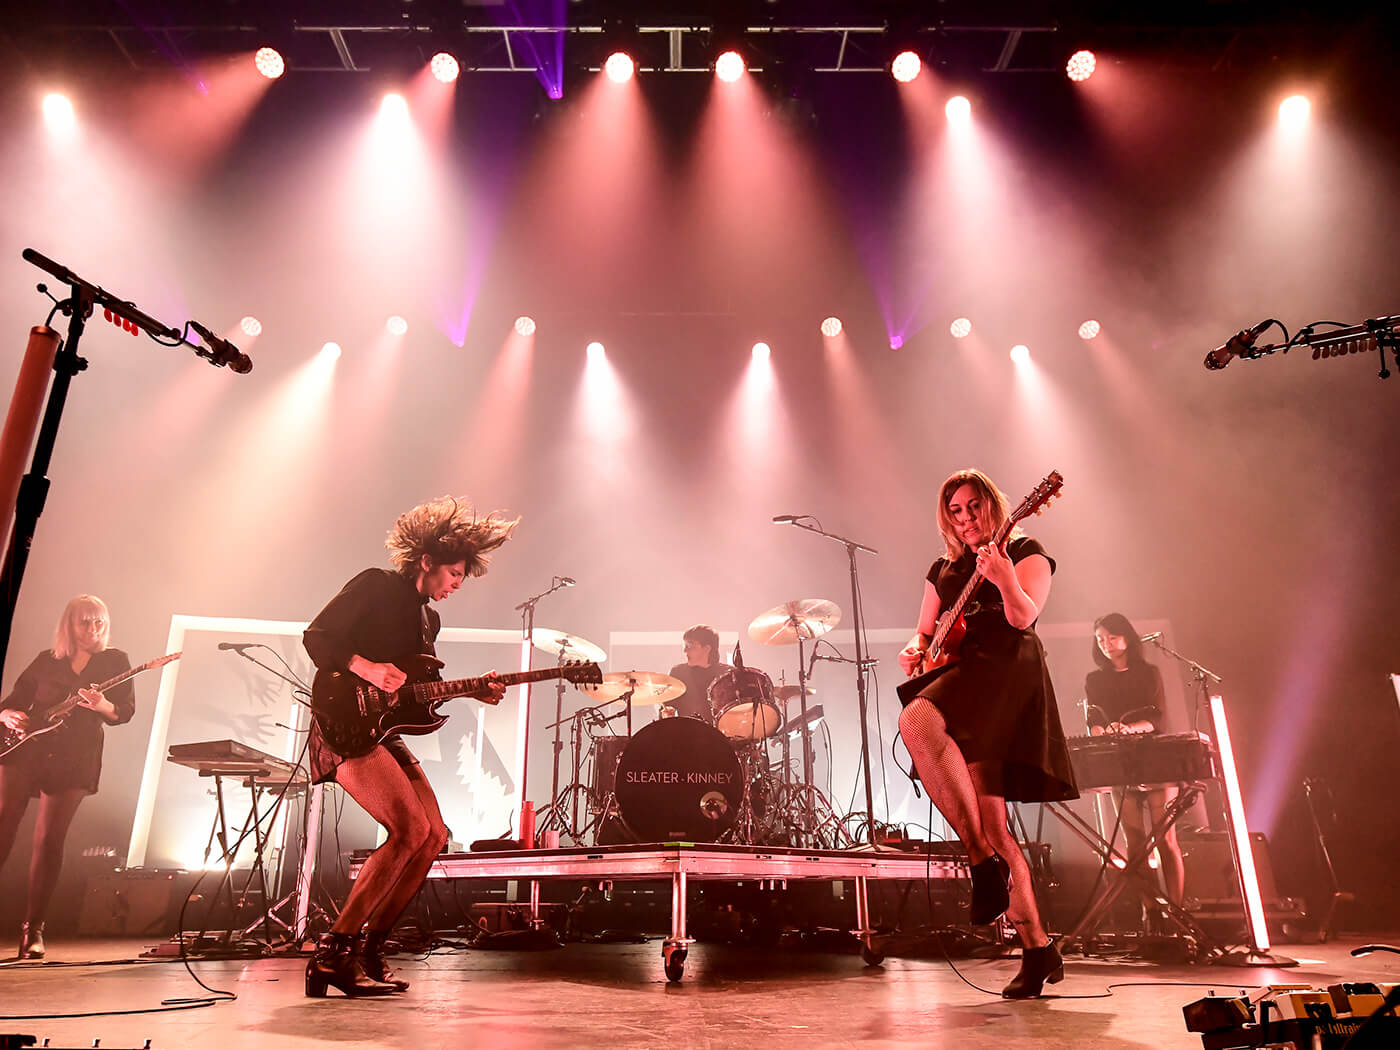 Sleater-Kinney performing at the Fox Theater in Oakland, California, 2019, photo by Steve Jennings/WireImage via Getty Images